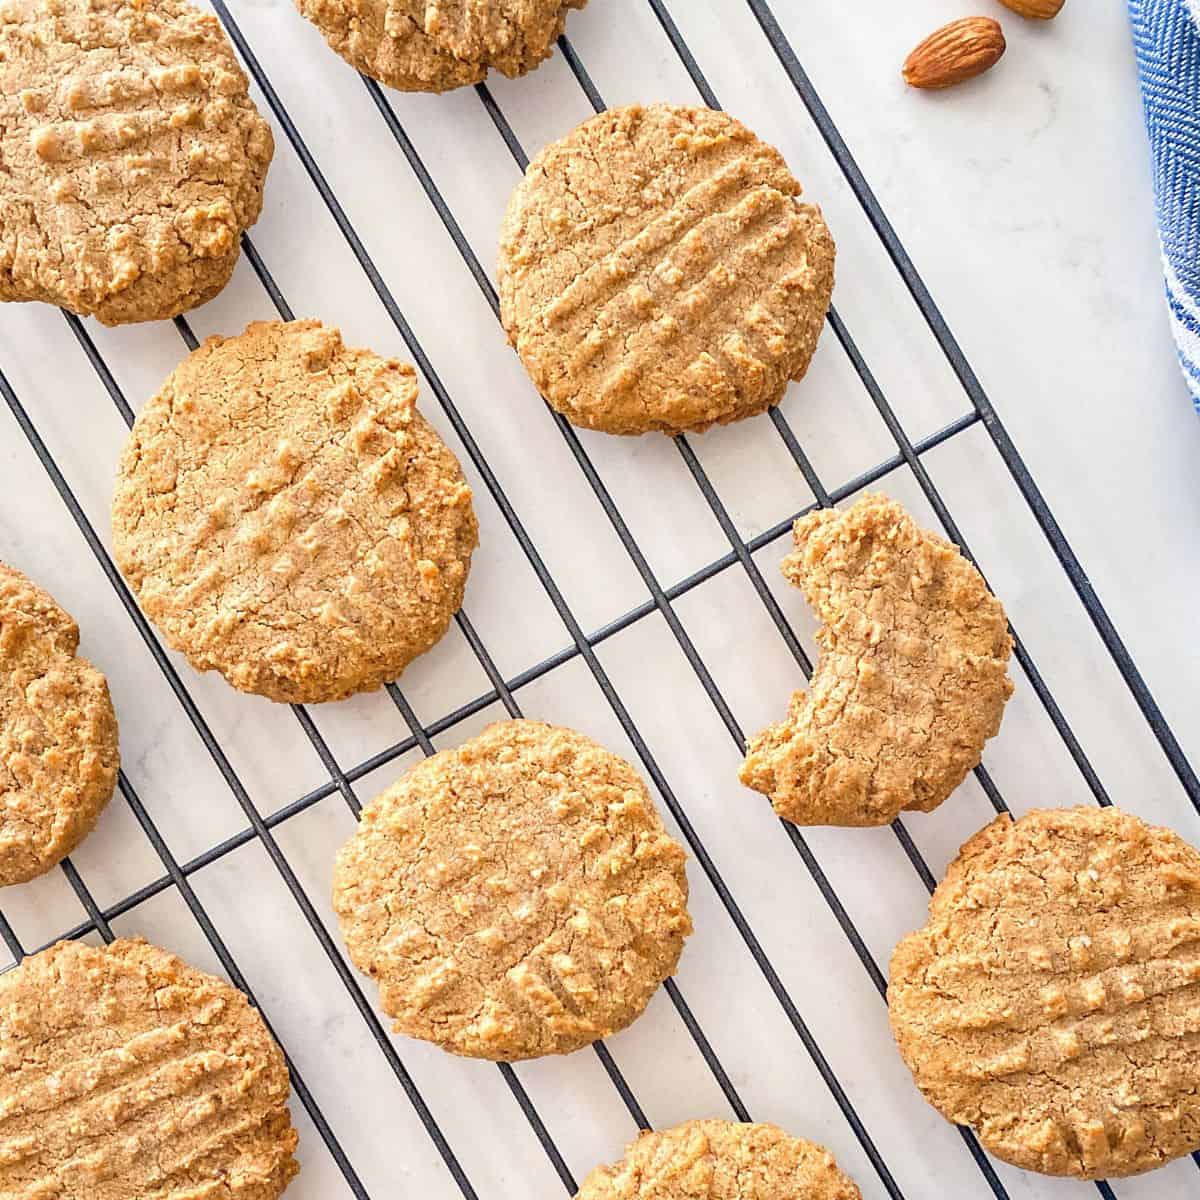 Almond butter cookies on cooling rack with bite taken from one.